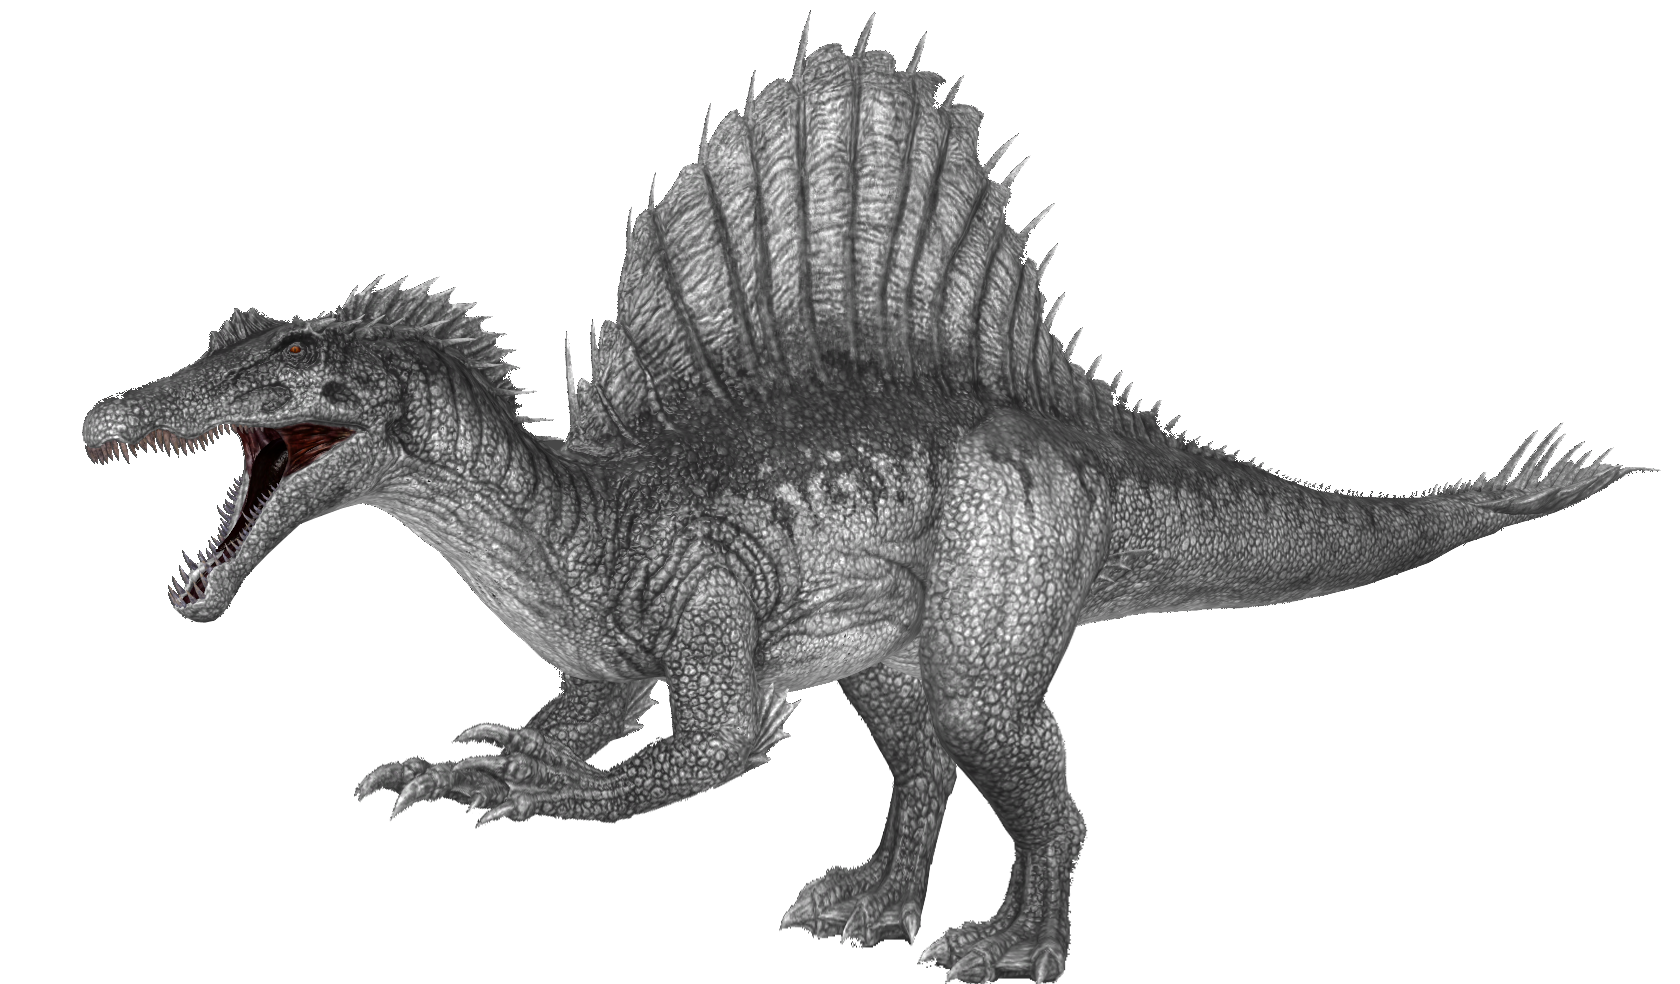 Spinosaurus Download Image PNG Image High Quality PNG Image